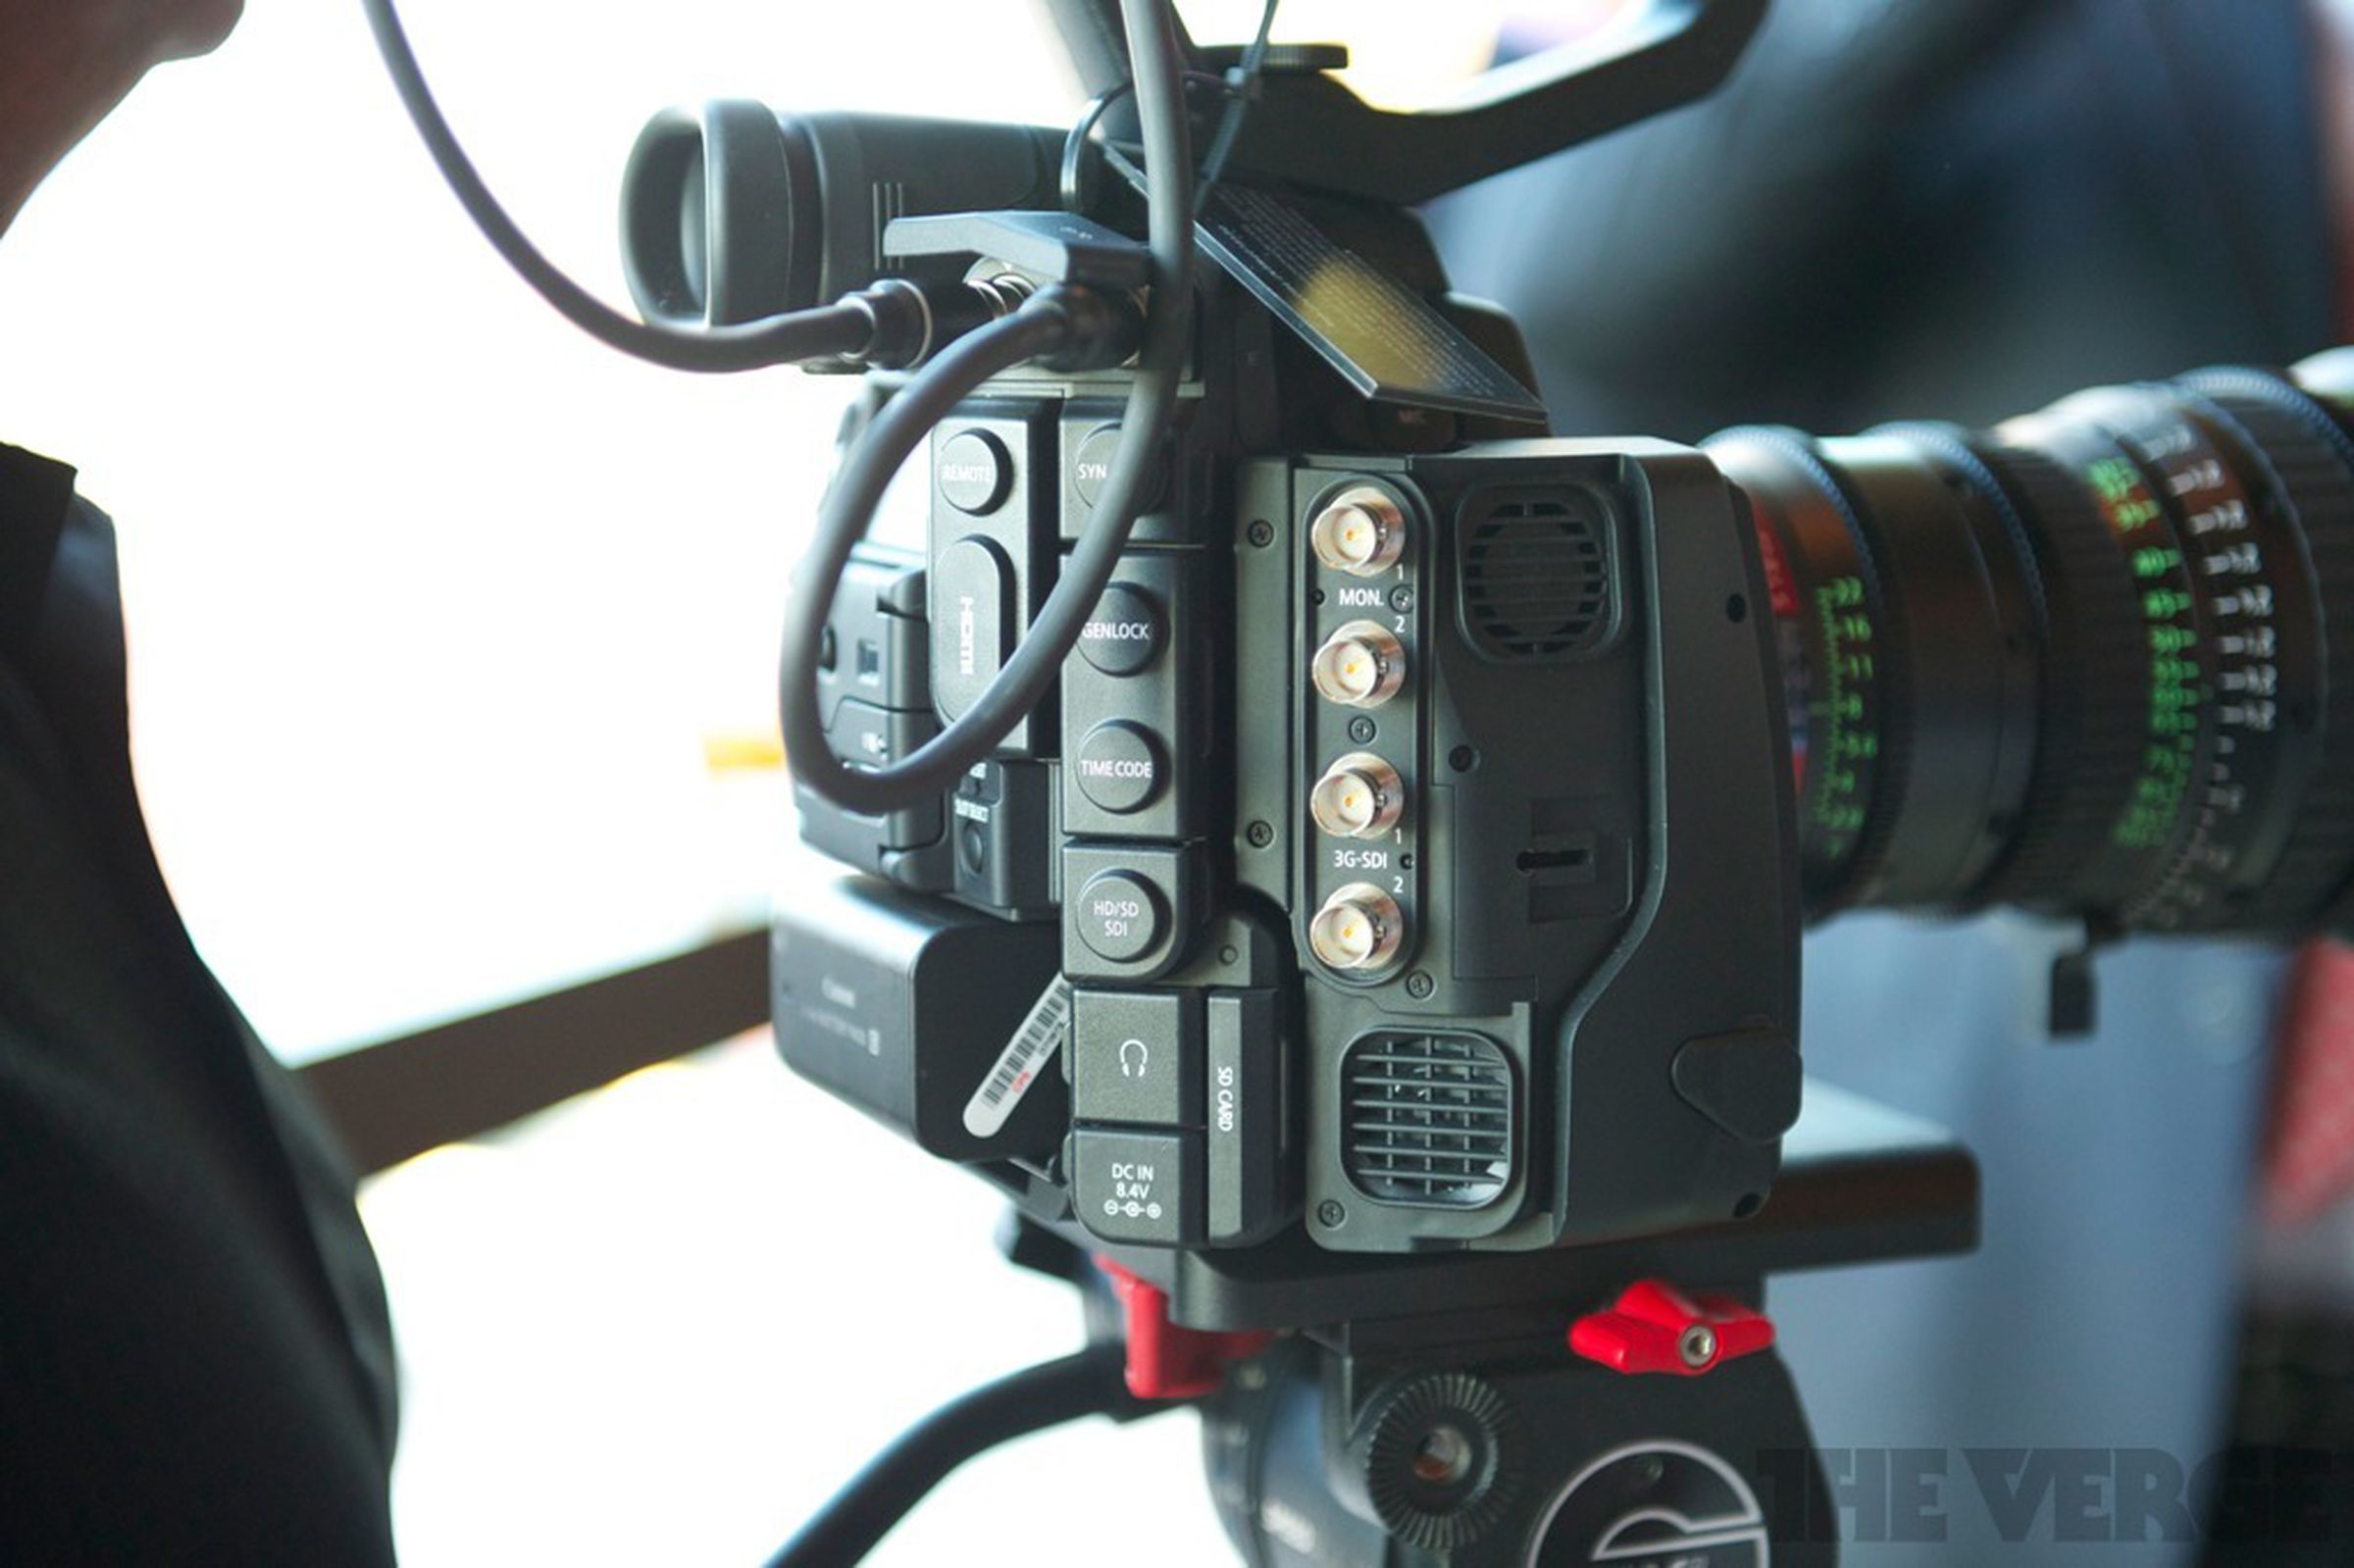 Canon EOS C500 and EOS-1D C hands-on pictures